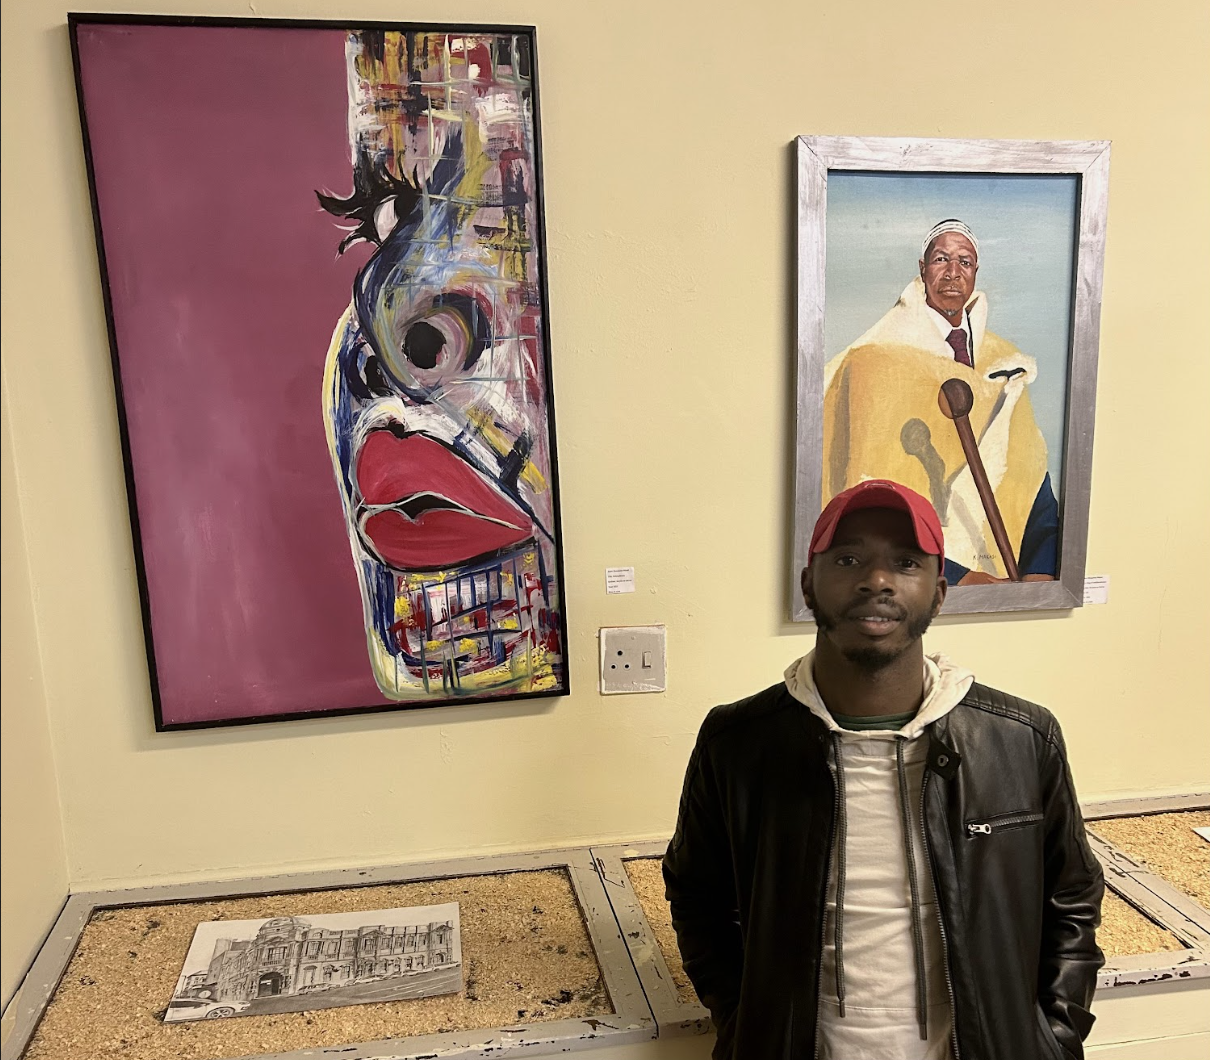 Mabongo poses beside his favourite curated artwork within the exhibition. Photo: Ruvesen Naidoo 